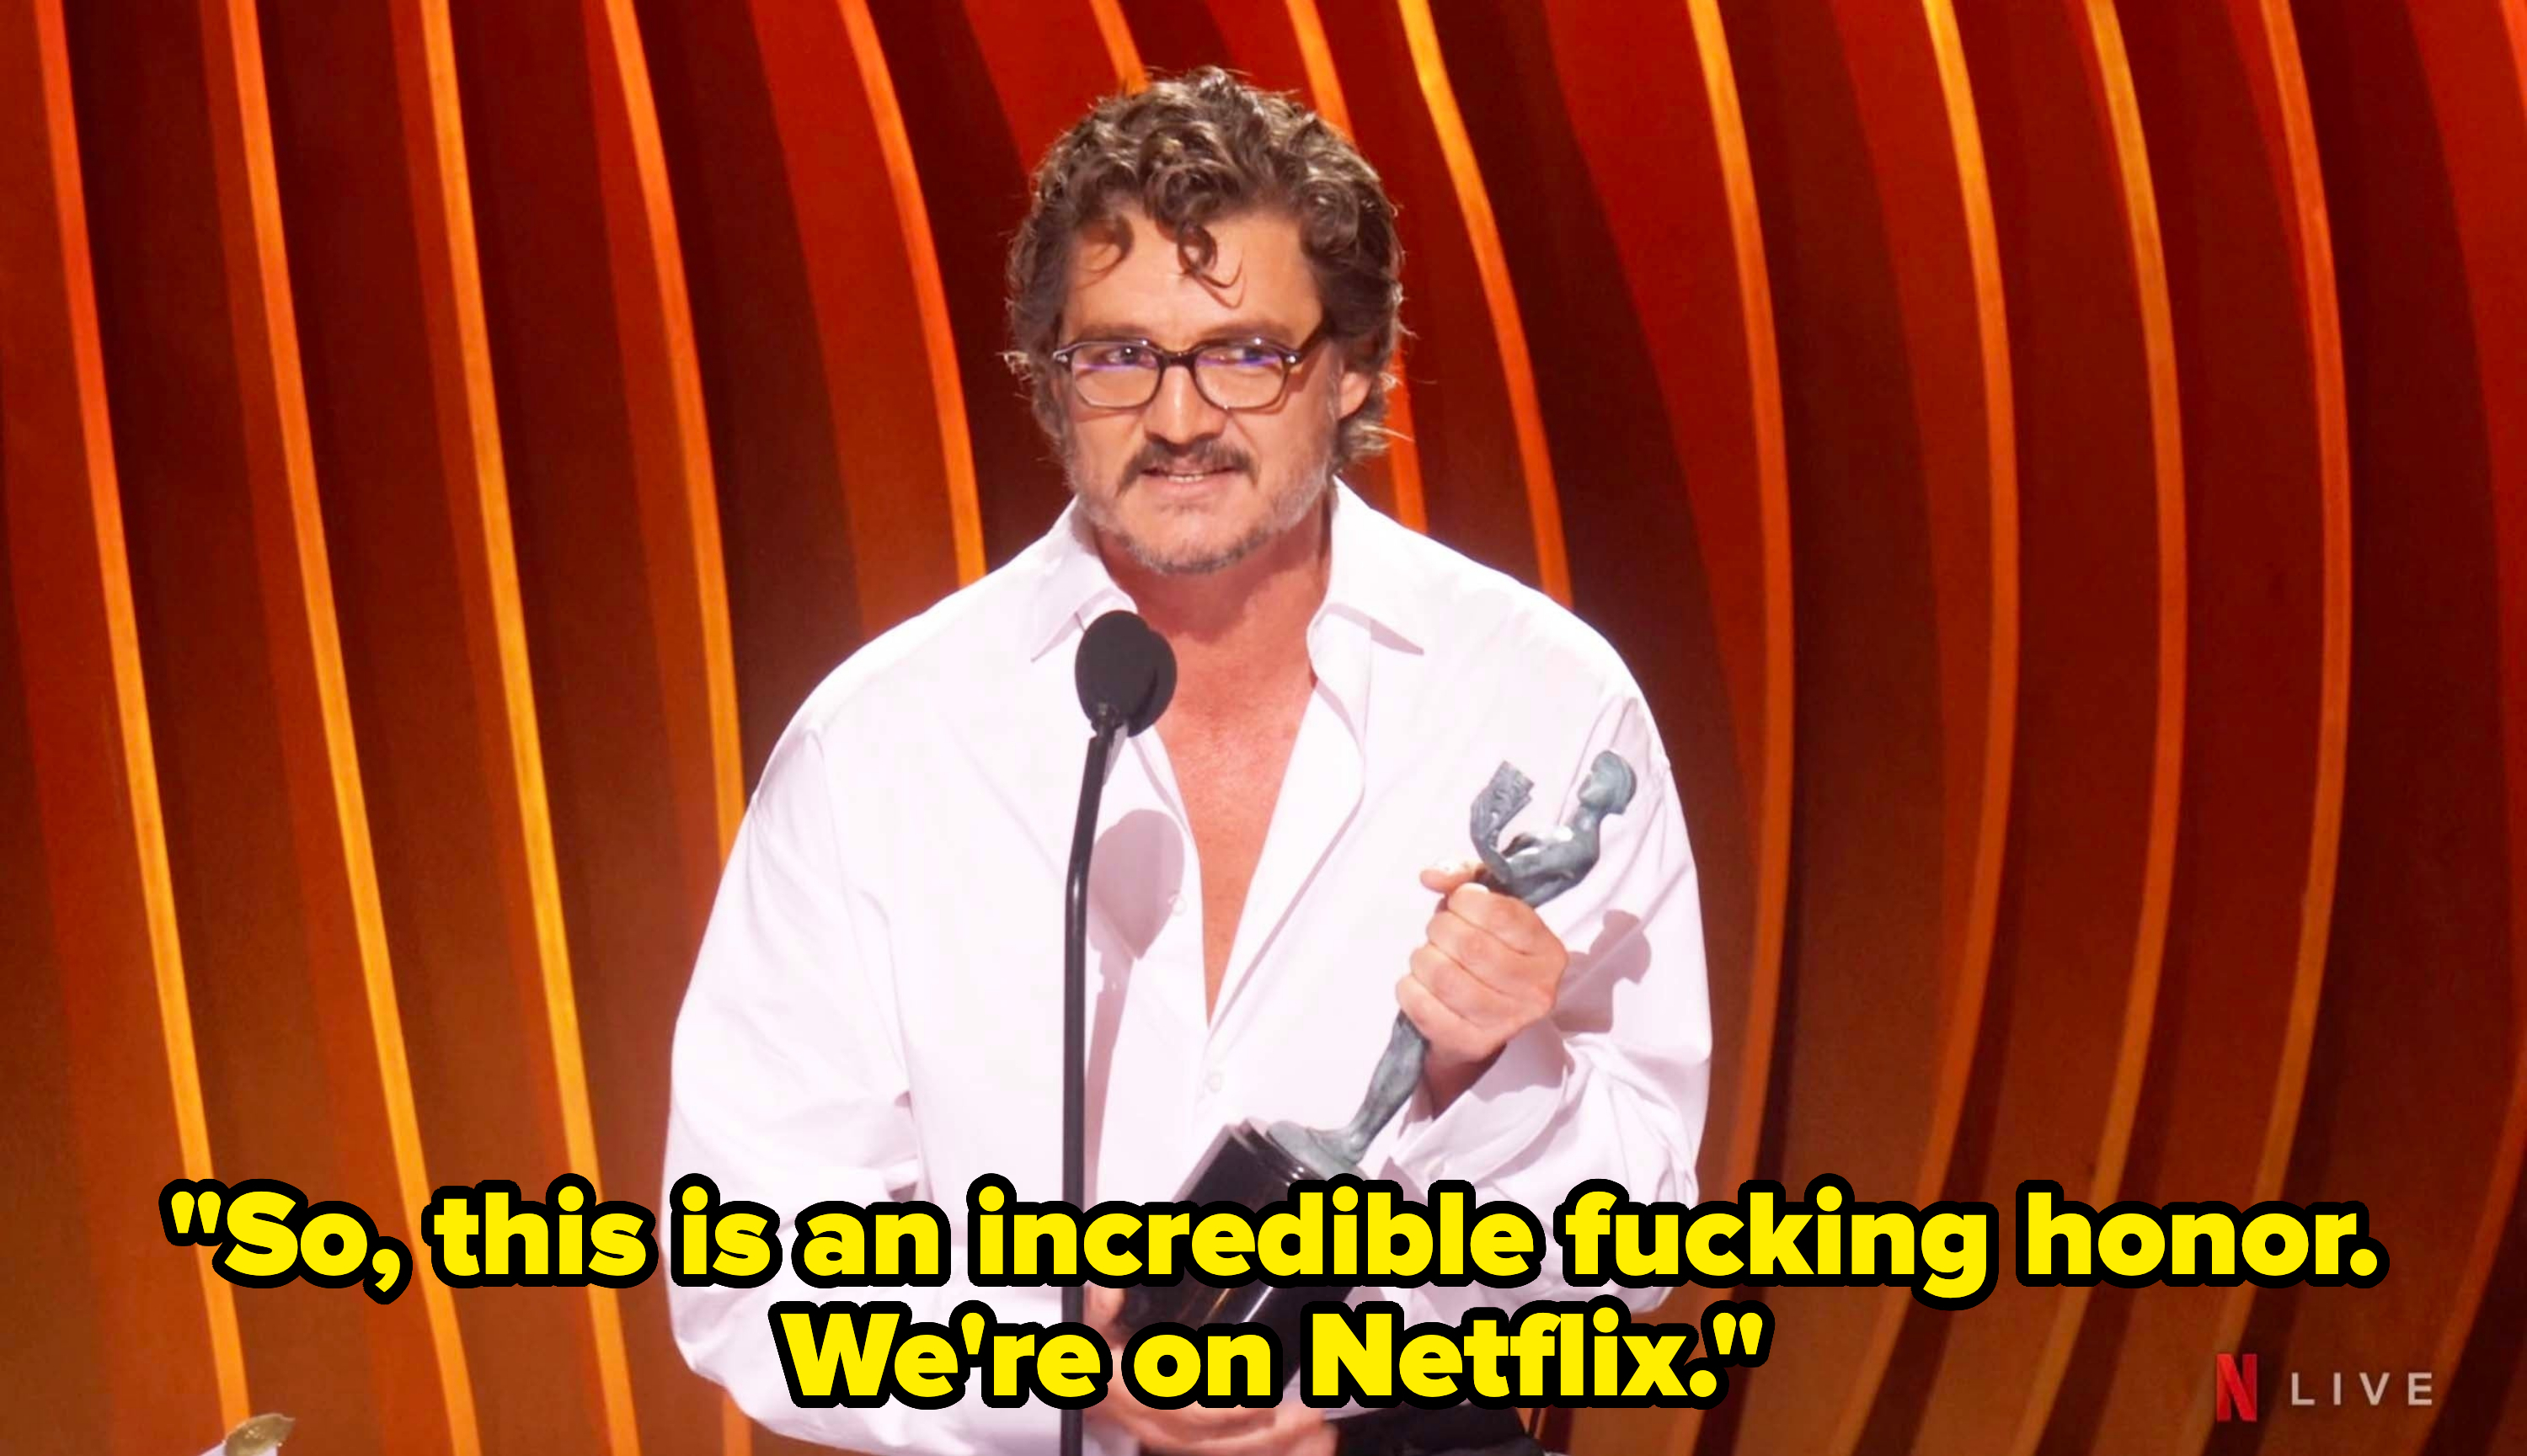 he says, so this is an incredible fucking honor. we&#x27;re on netflix